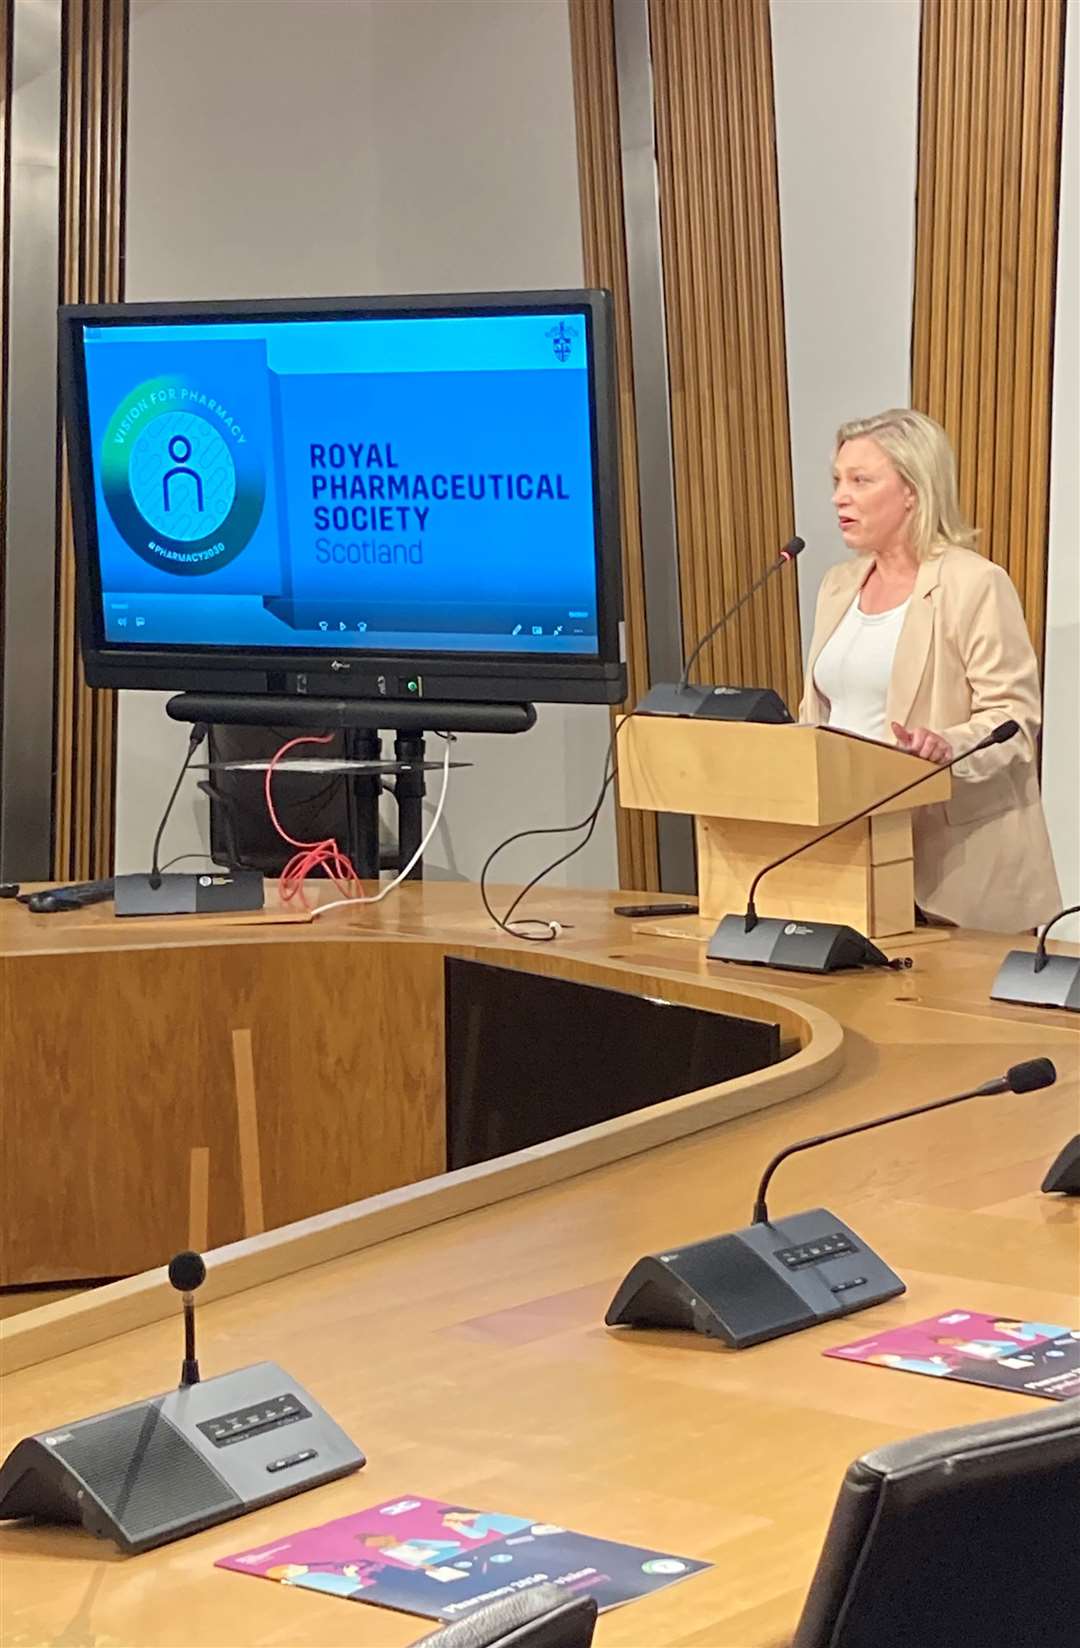 Aberdeenshire East MSP Gillian Martin hosted the parliamentary reception highlighting a new professional vision for pharmacy in Scotland.